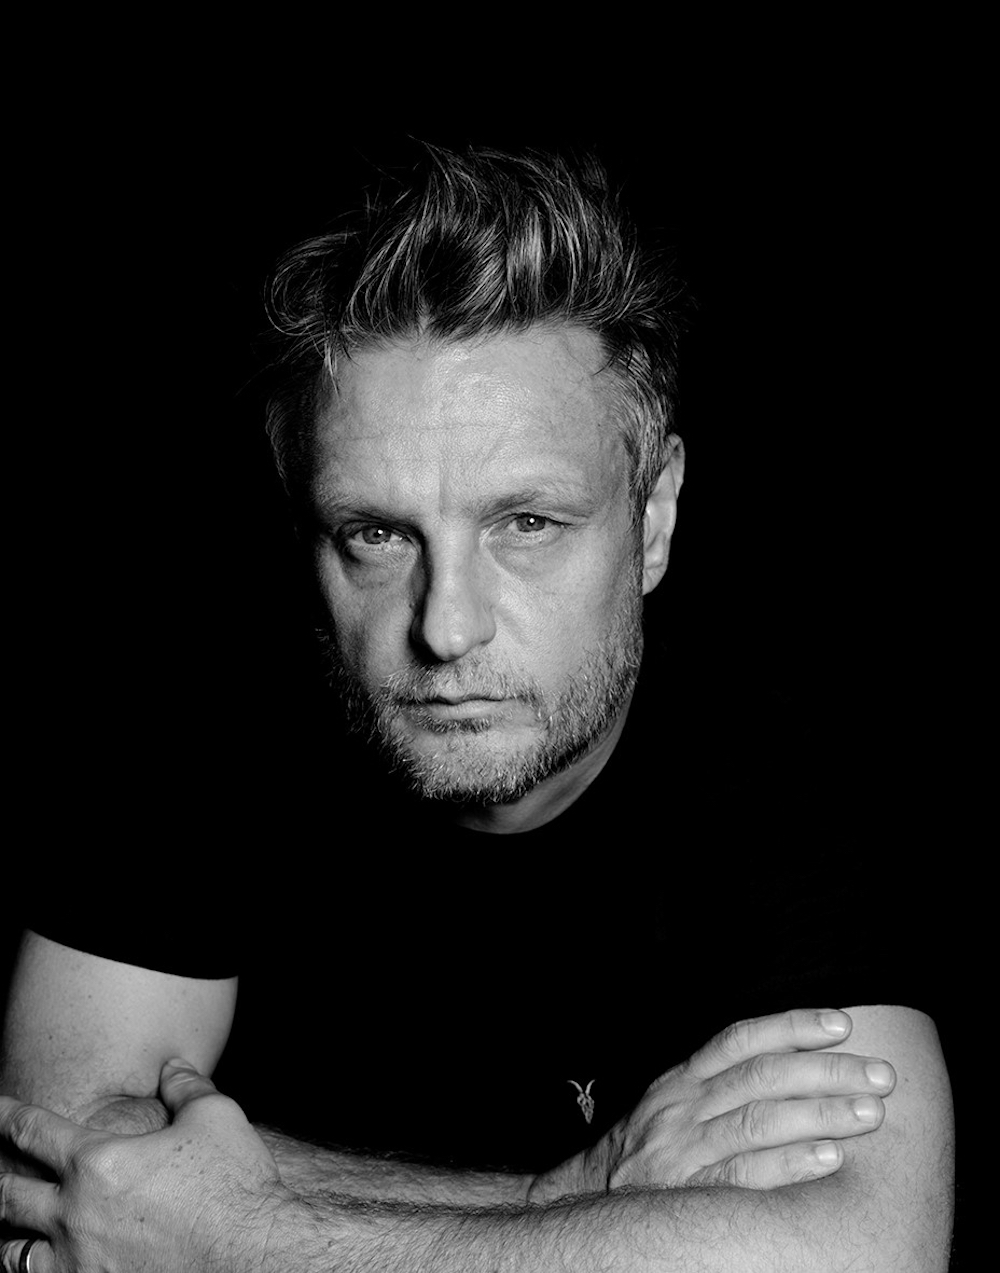 Rankin will be running a physical SWAG store during VISUAL NOISE at the Maryland Studio, London. Image: self-portrait by Rankin